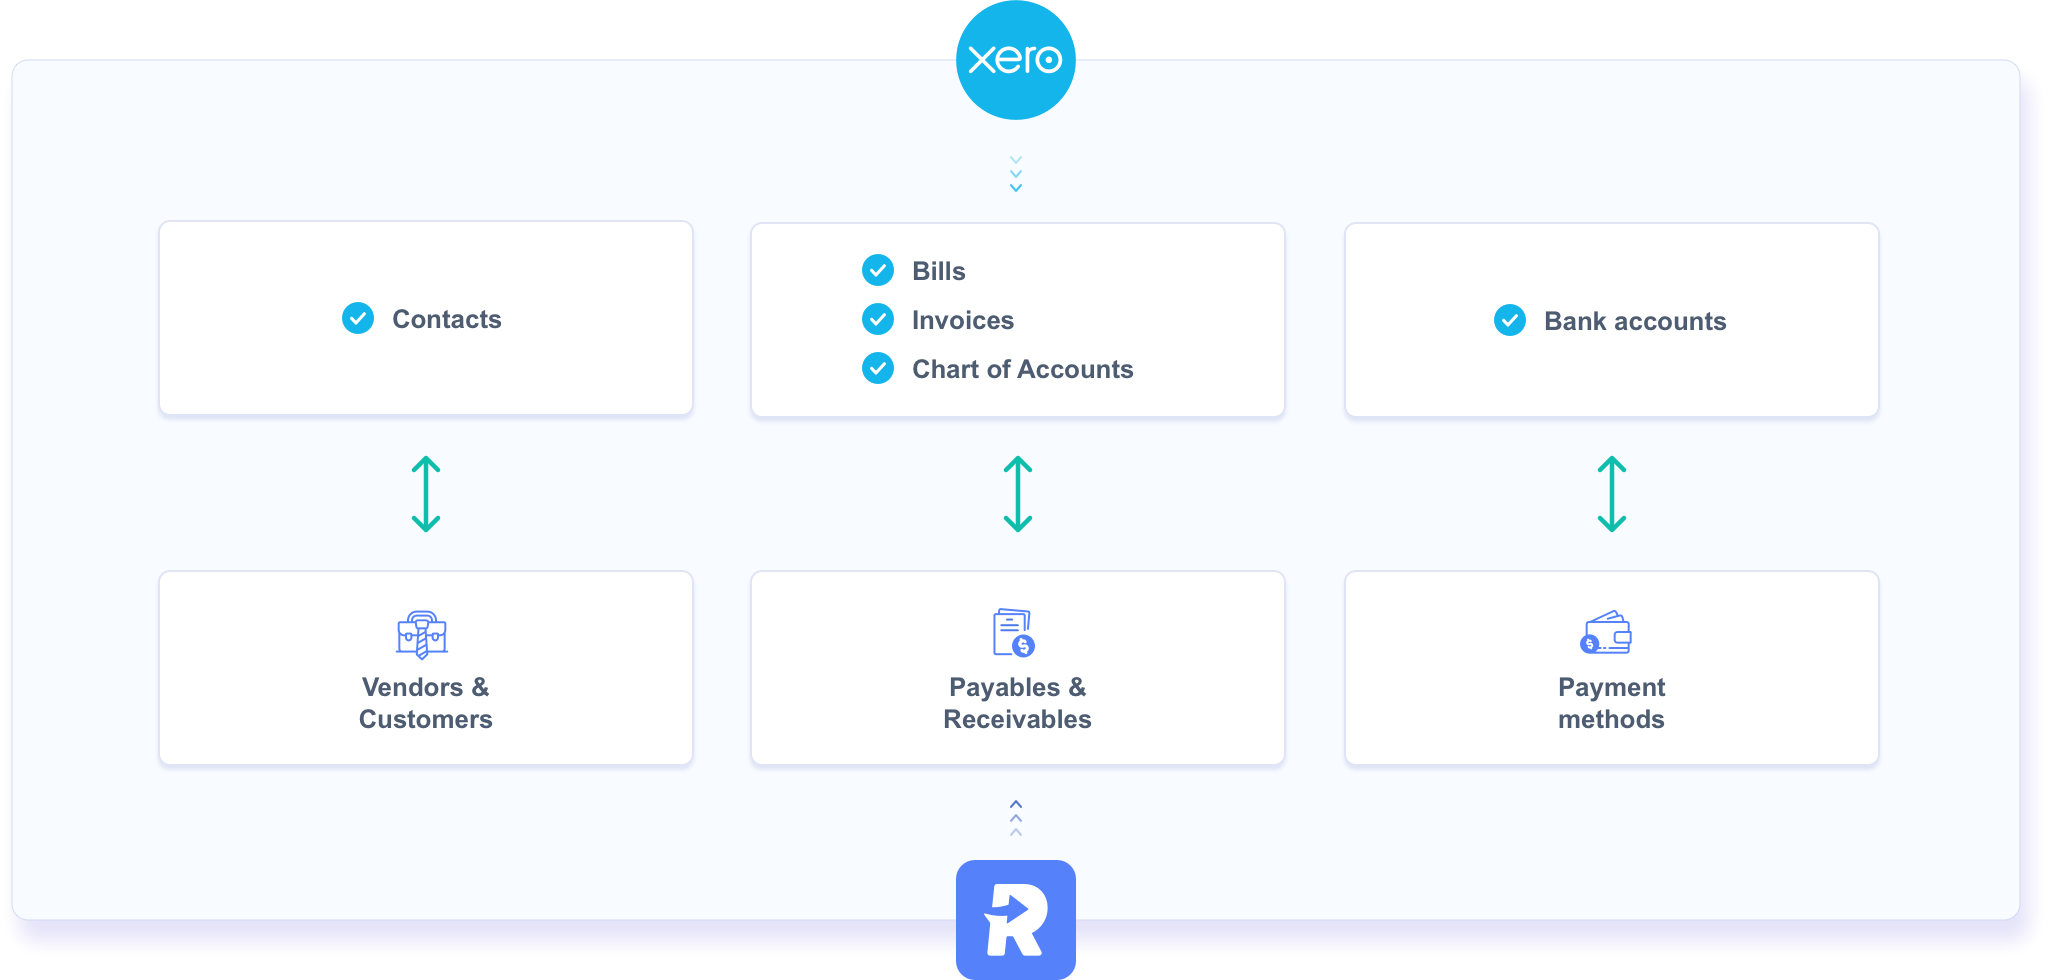 What data gets shared between Xero and Routable